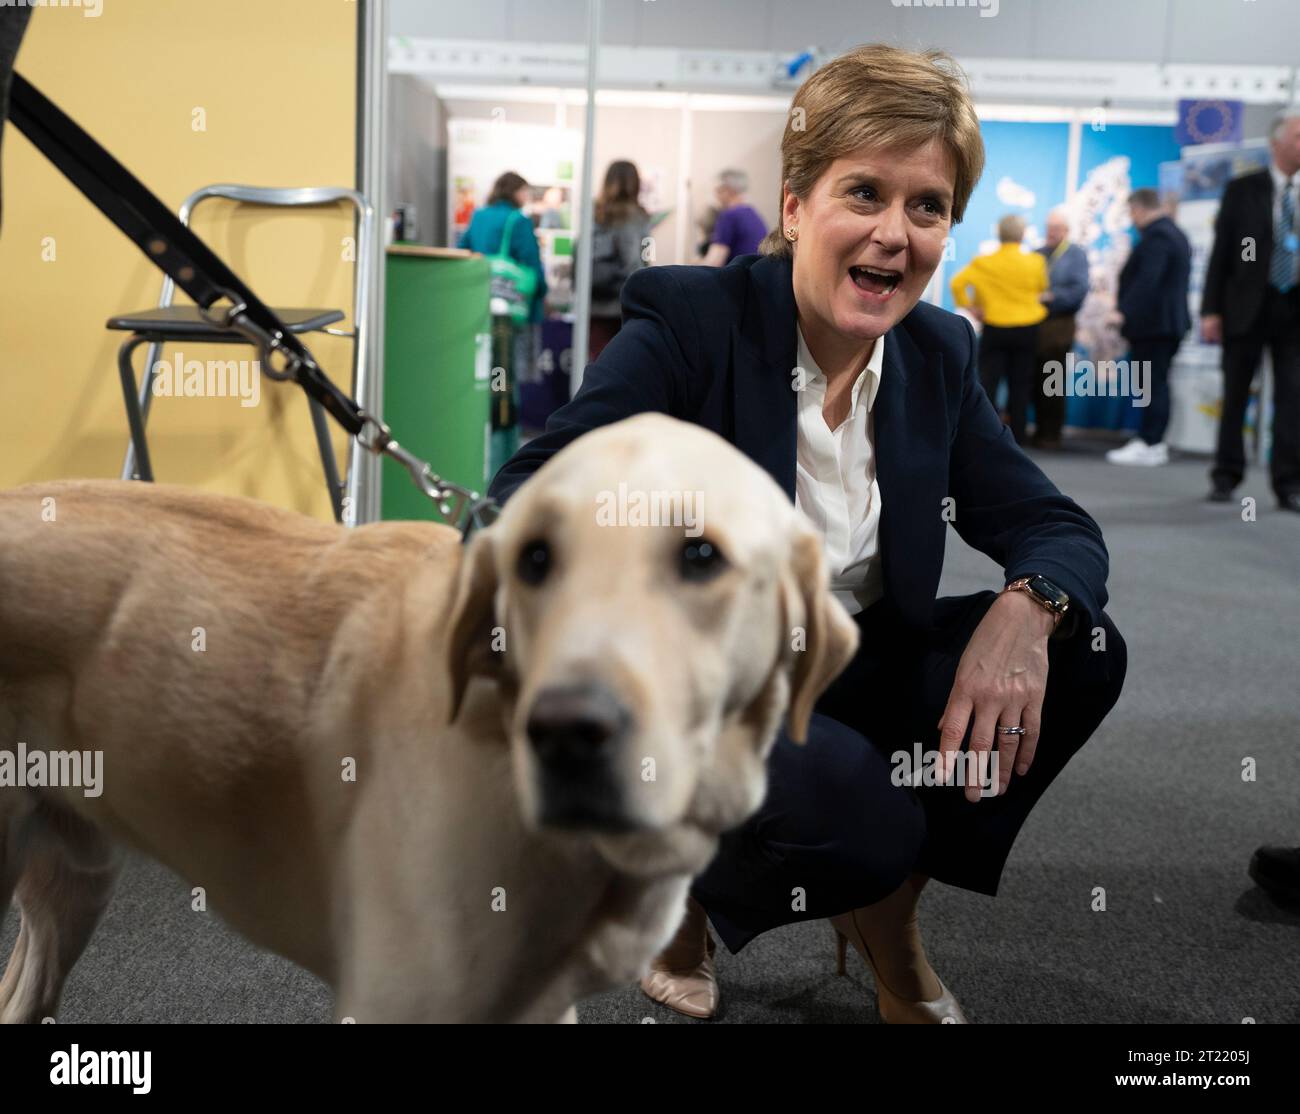 Aberdeen, Scotland, UK. 16th October 2023.  Day two of the SNP annual conference and former First Minister Nicola Sturgeon makes an appearance. A media frenzy followed before she made her way into the conference venue to listen to the afternoon’s proceedings. Nicola Sturgeon overcomes her fear of dogs to pet Sammy the guide dog. Iain Masterton/Alamy Live News Stock Photo